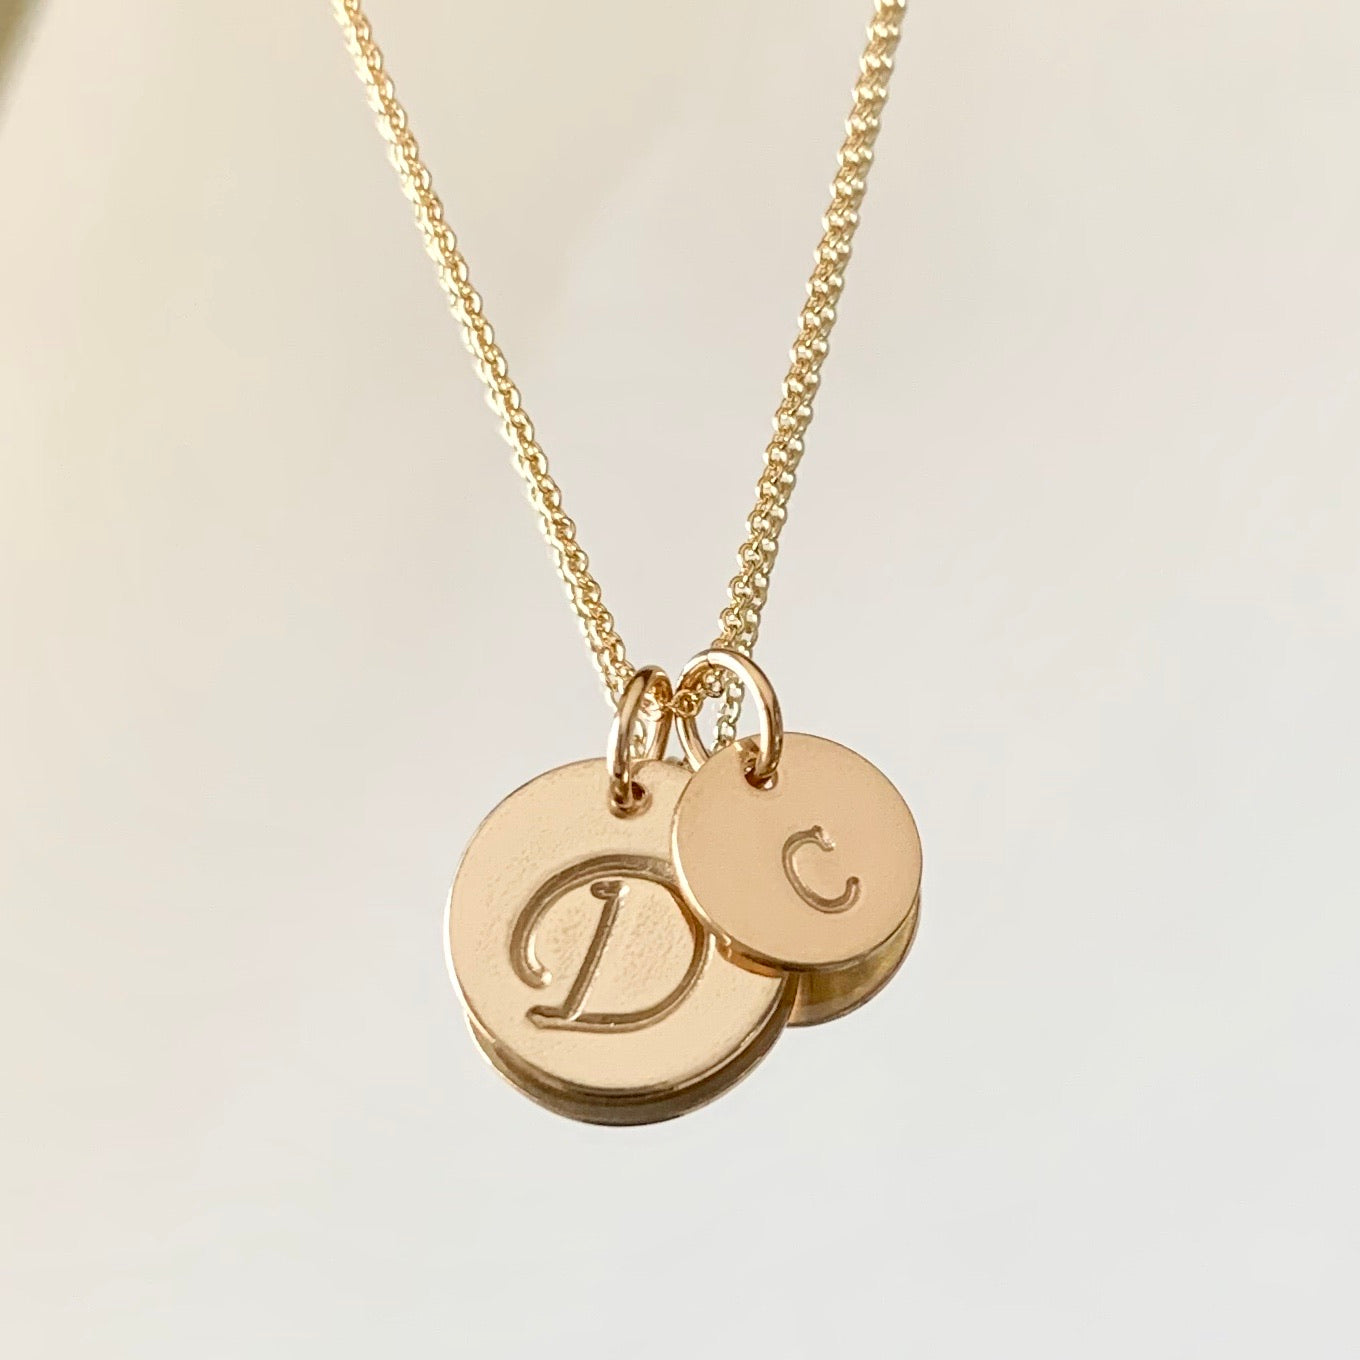 Big initial little initial necklace - mother and child, big sister and little sister